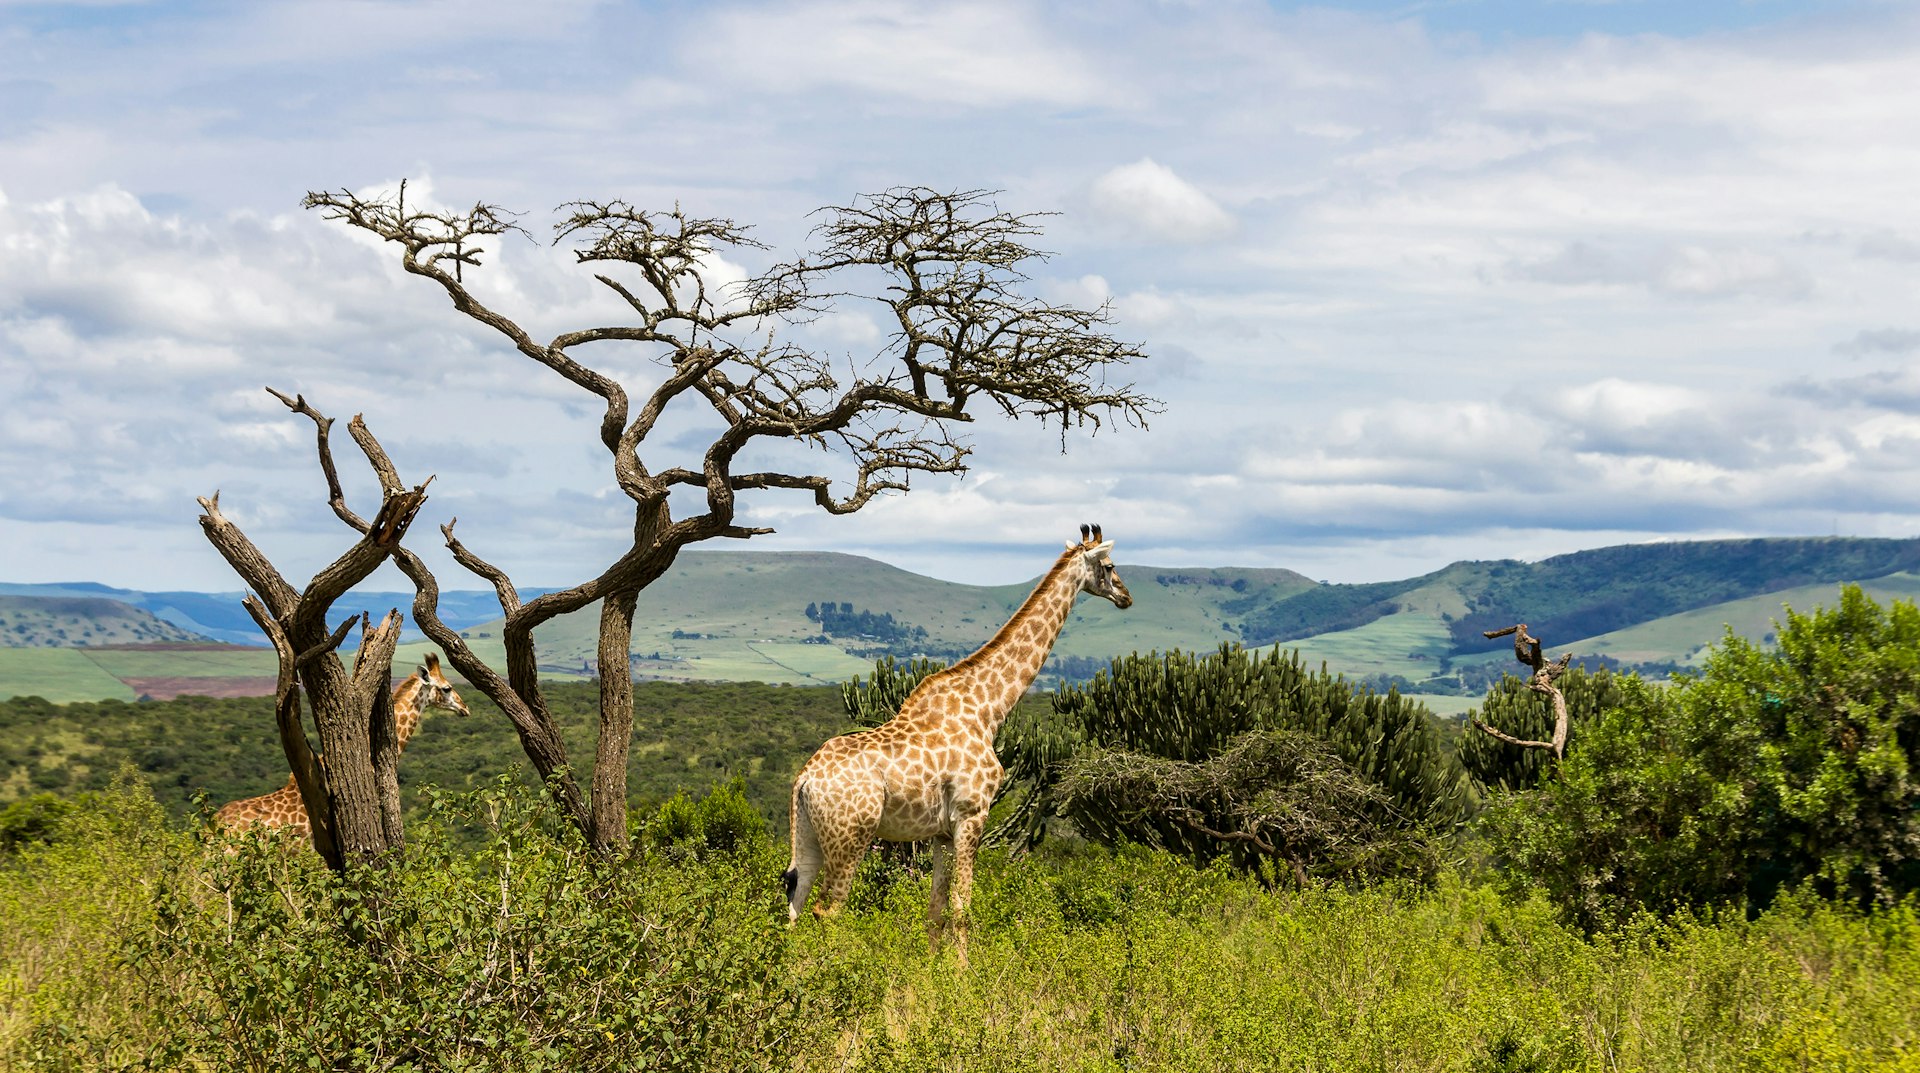 Features - Two Giraffes In The Wild